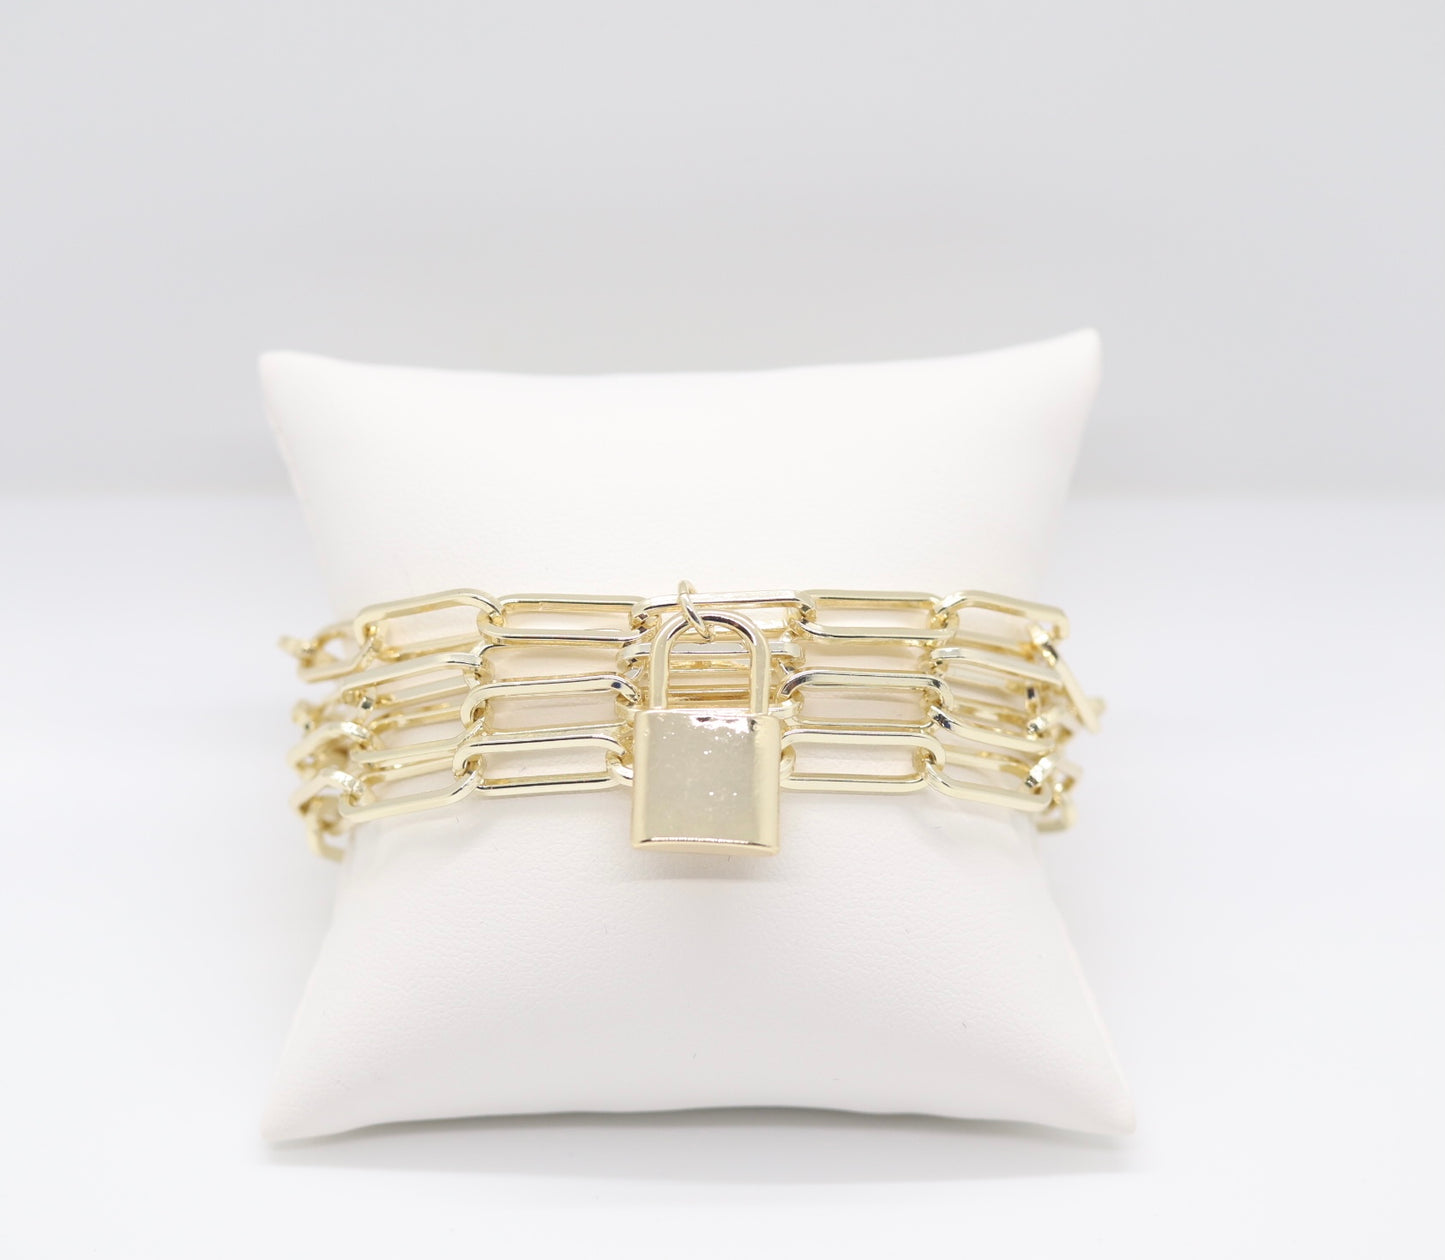 Beautiful Multi-Layer Gold Paperclip Chain Bracelet with Dangling Lock and Magnetic Clasp